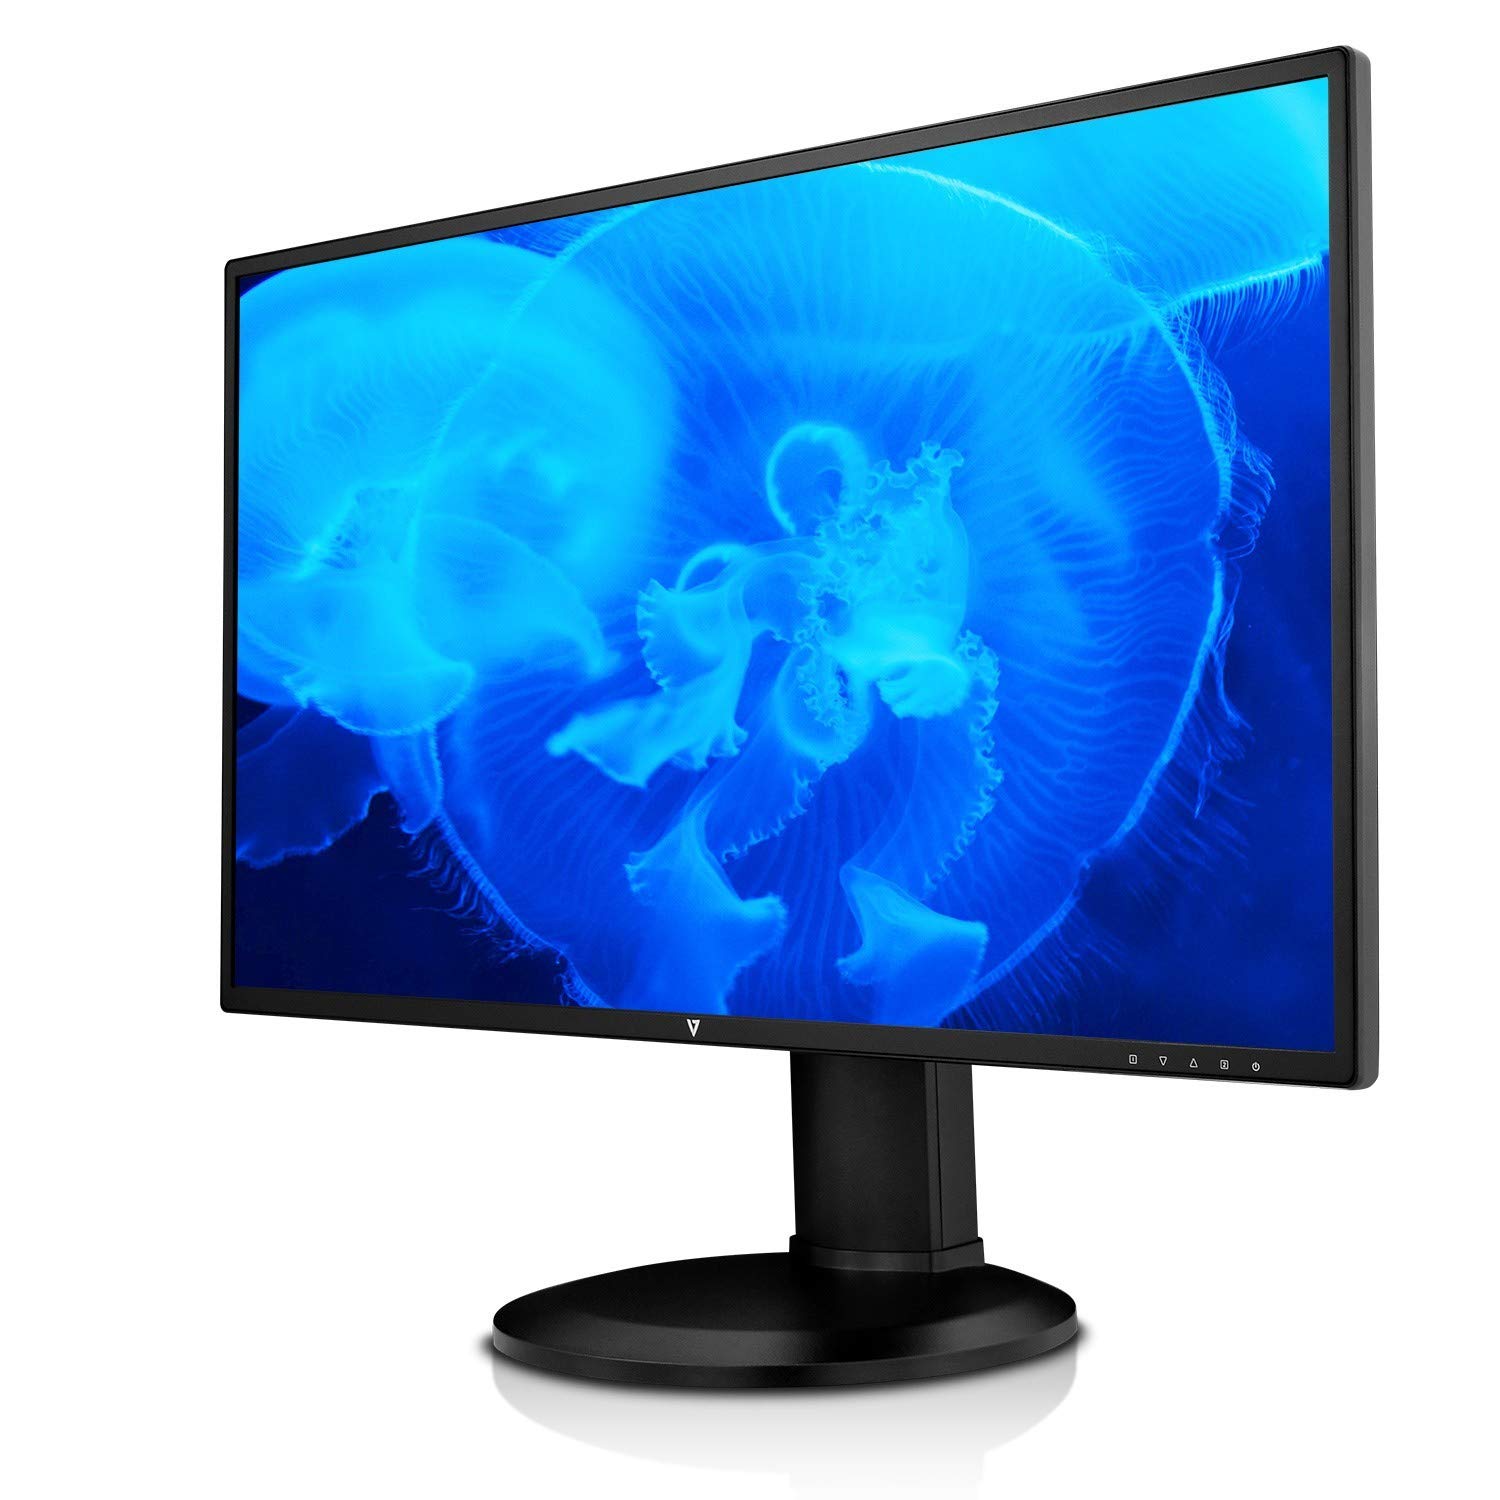 V7 L27HAS2K-2N 27" QHD 2560x1440 LED LCD ADS Monitor with Built-In Speakers Refurbished